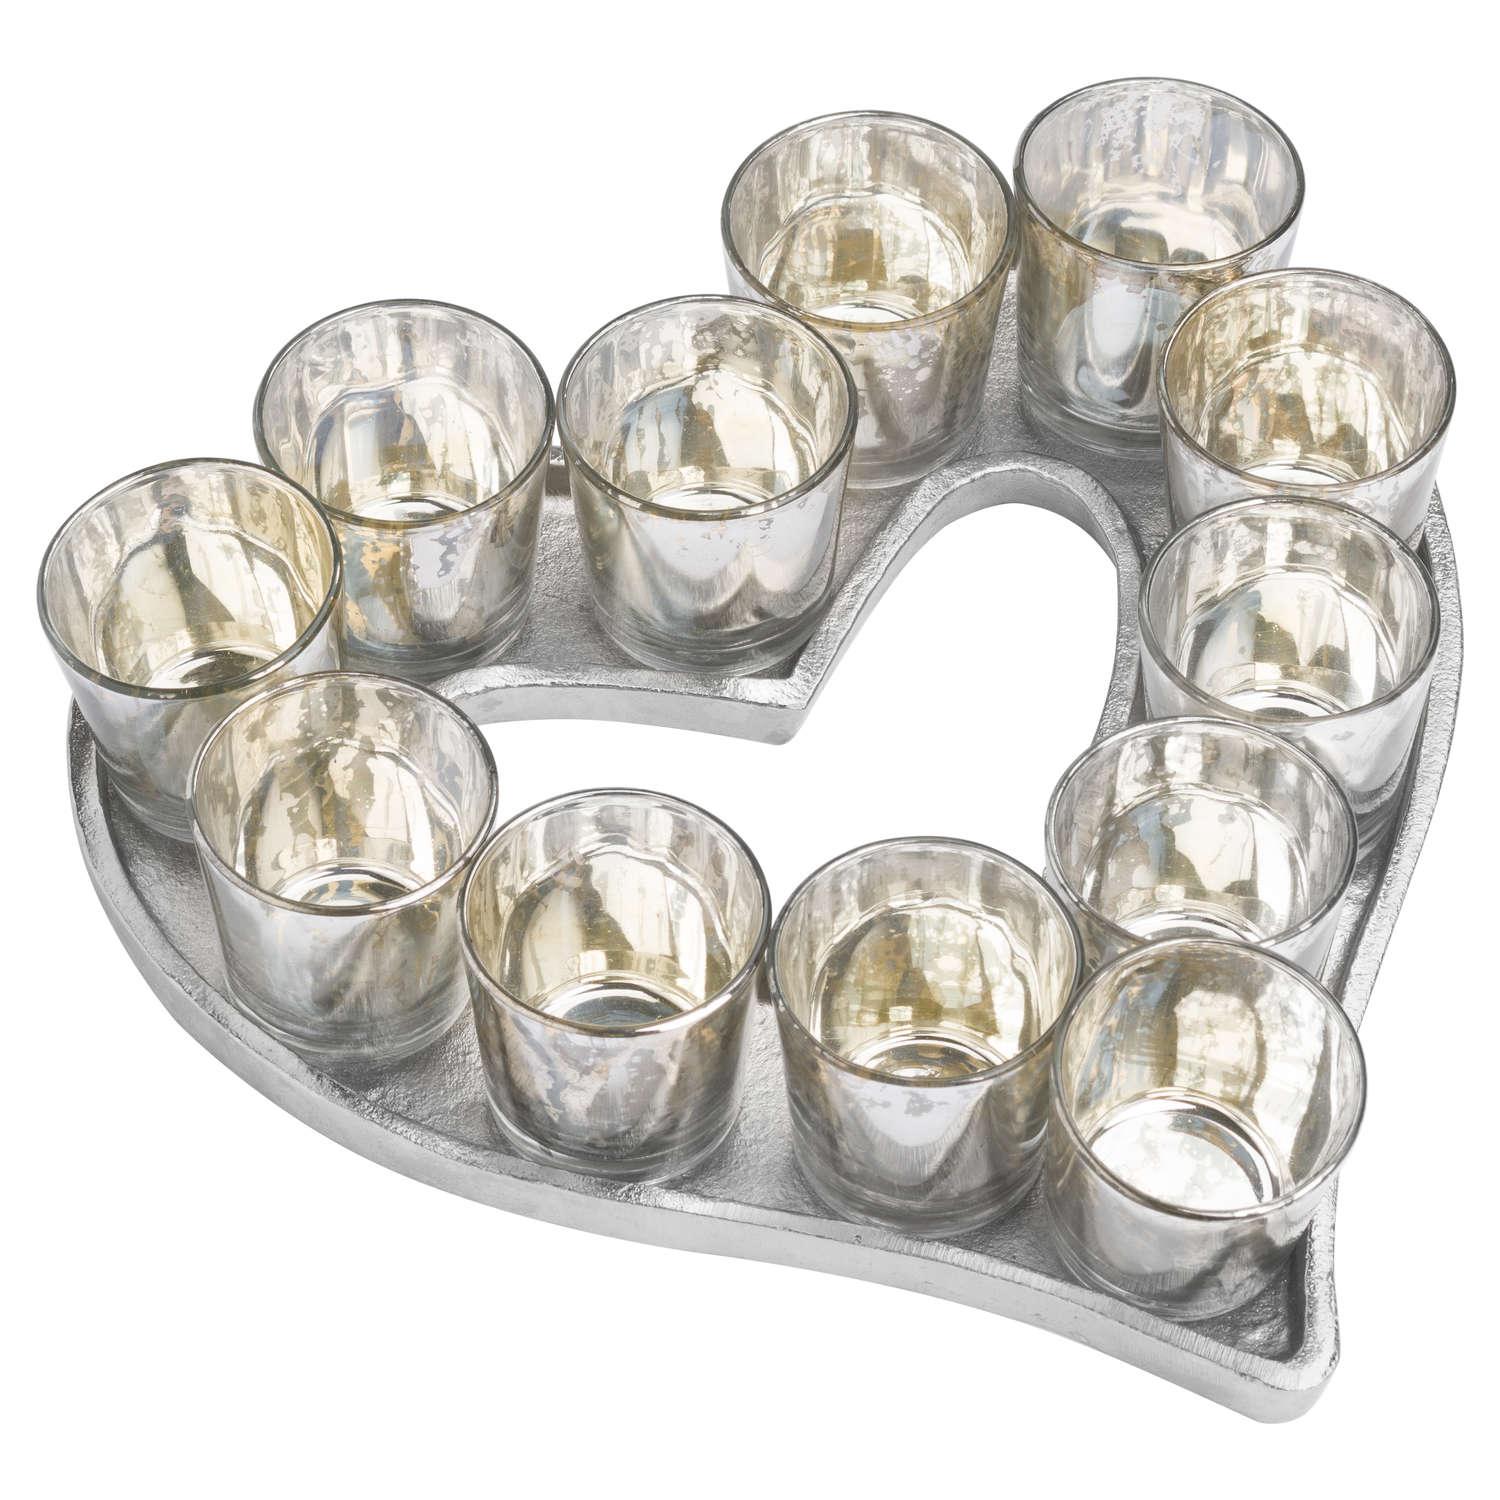 Cast Aluminium Heart Tray With Silver Glass Votives - Vookoo Lifestyle